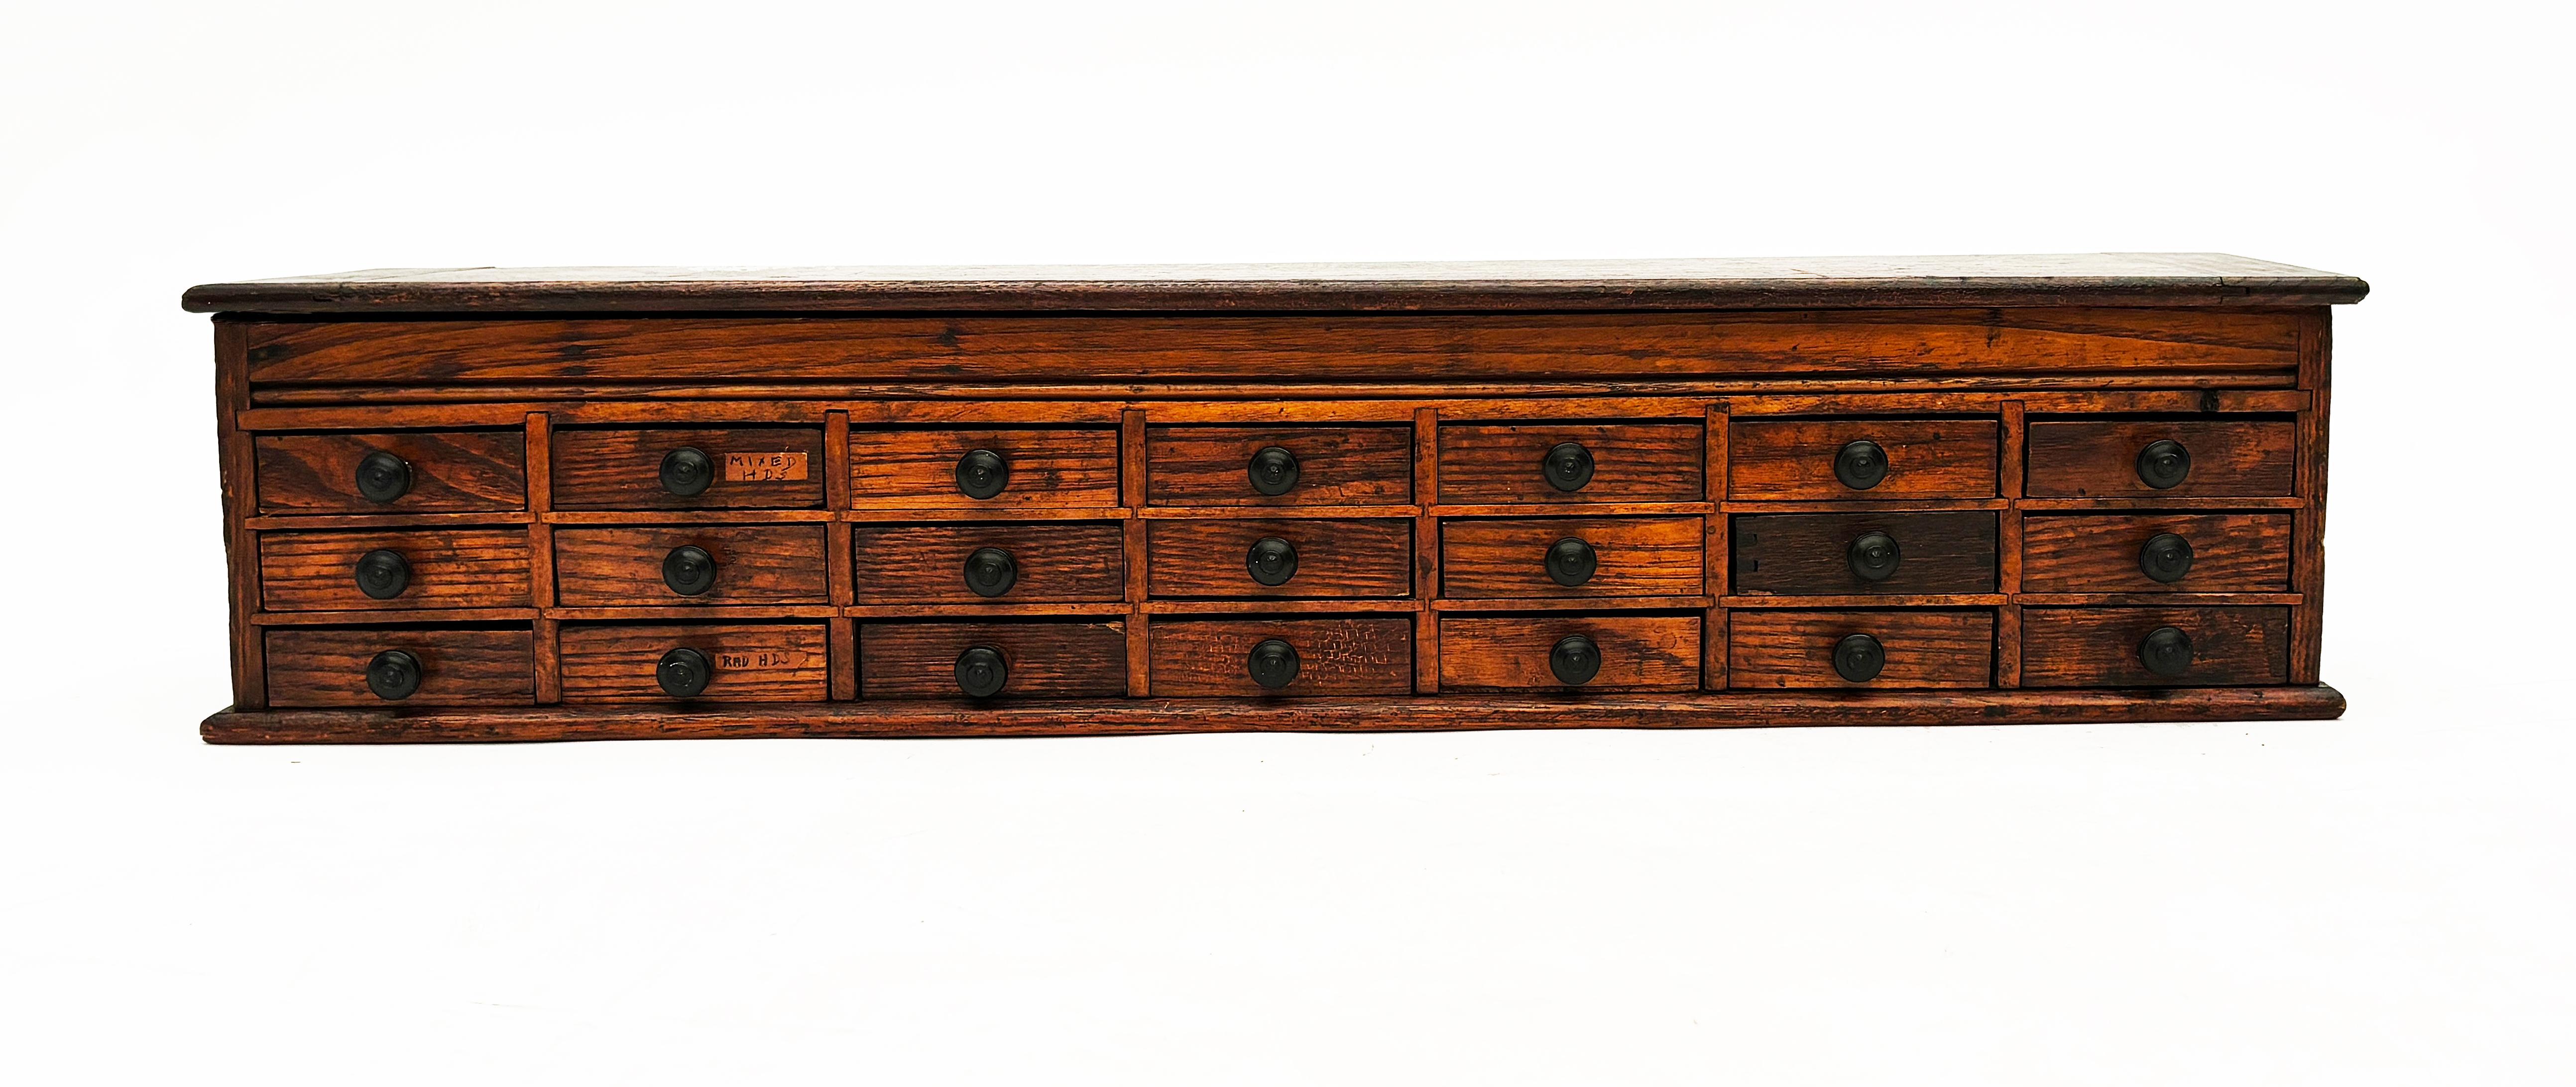 This magnificent piece was once used by a master watchmaker. This uniquely sized cabinet would have sat upon a larger wooden work bench and housed small watch parts of that era. Made of rich tiger oak, the original surface is still wholly intact